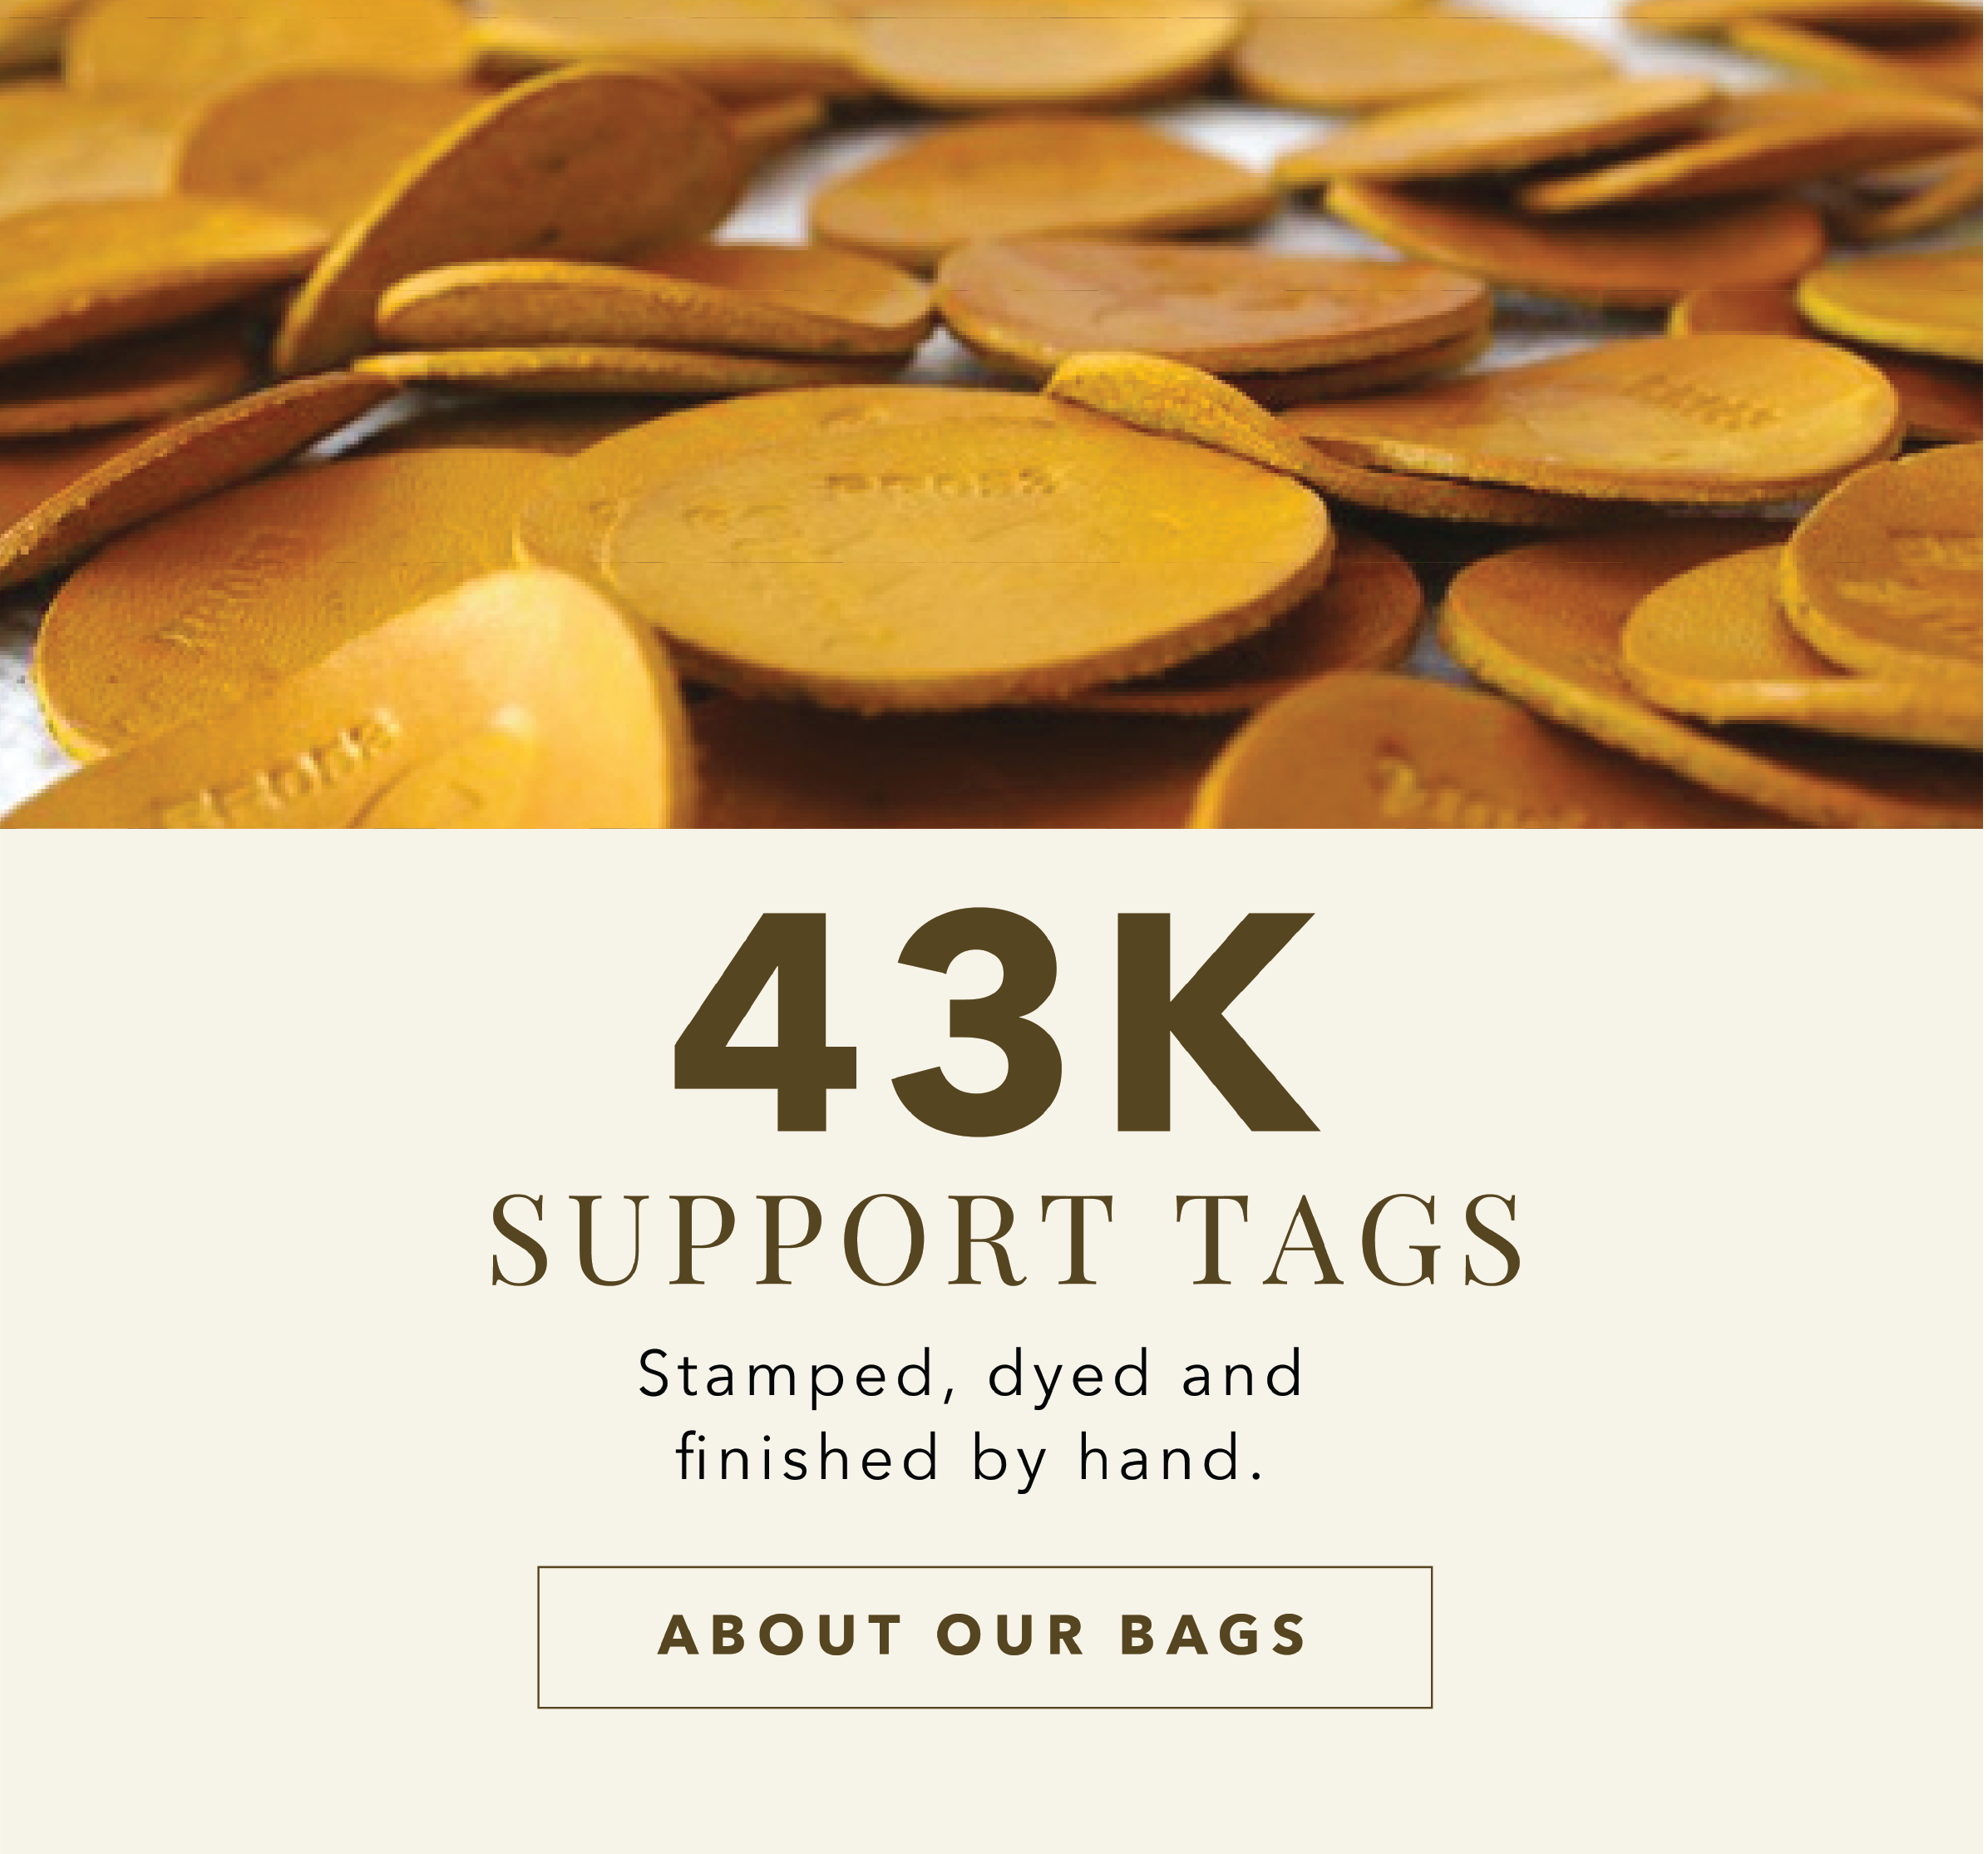 Stamped, dyed and finished 43k Support tags